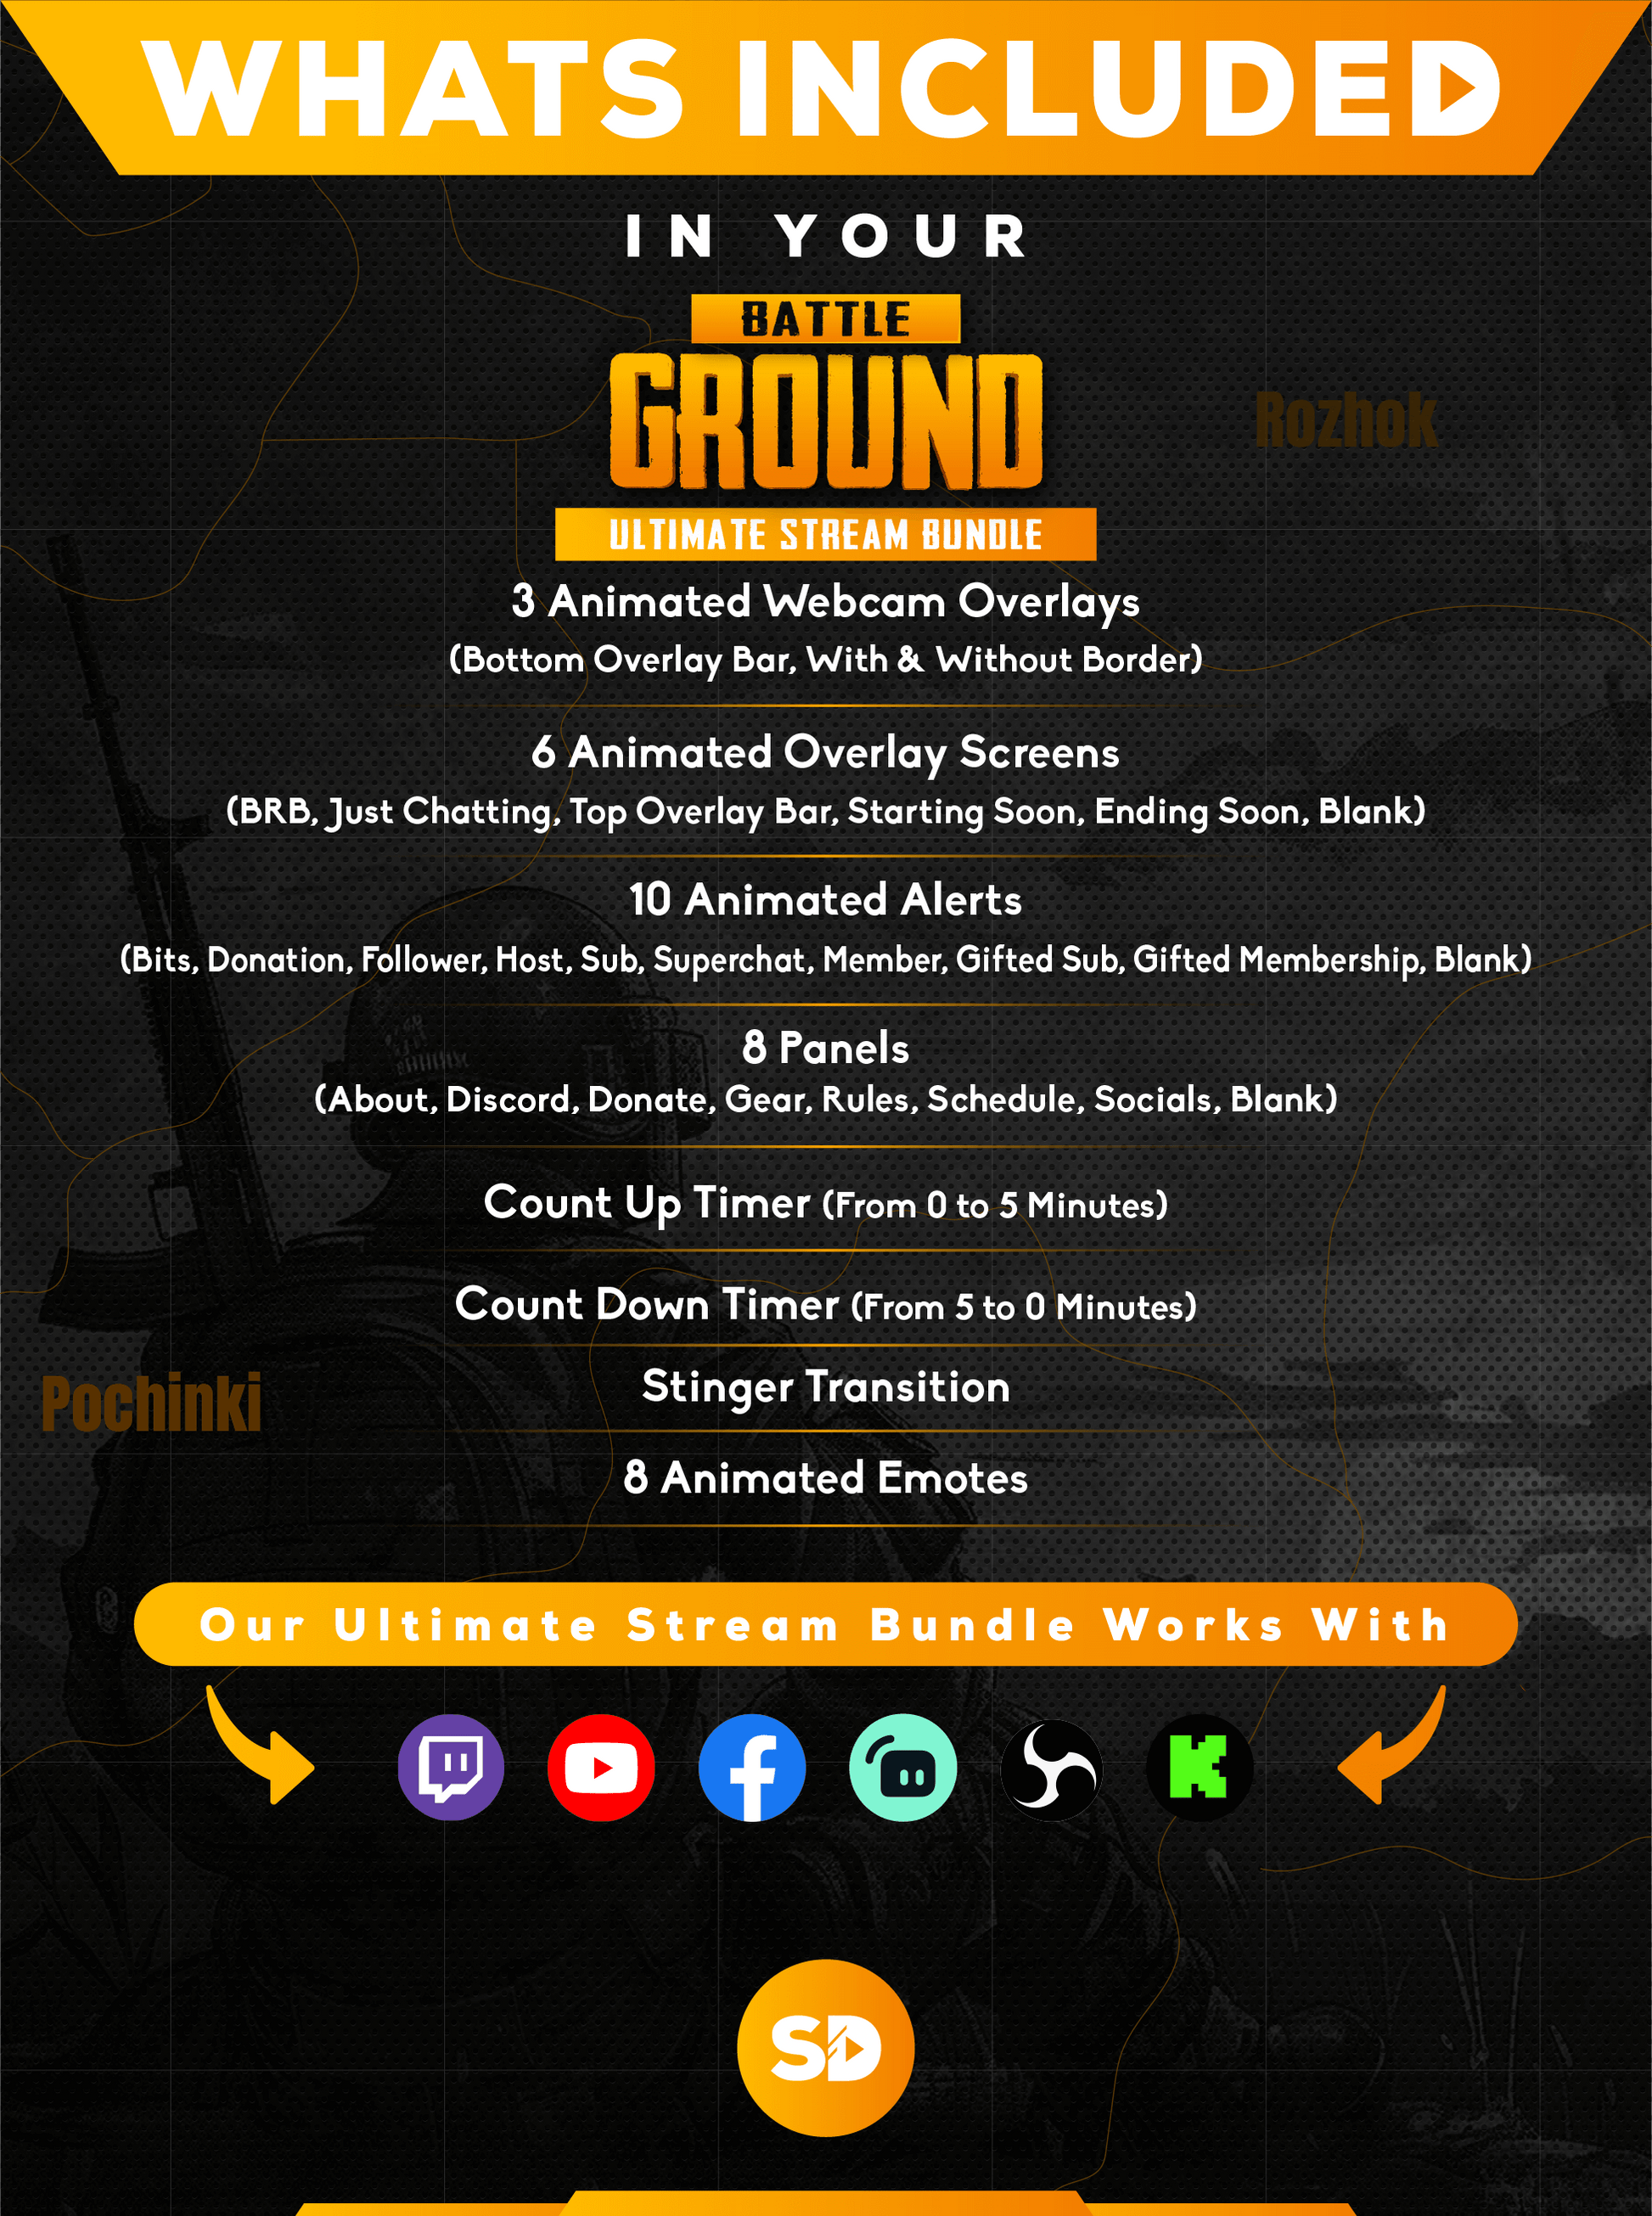 Ultimate stream package whats included in your bundle battleground stream designz